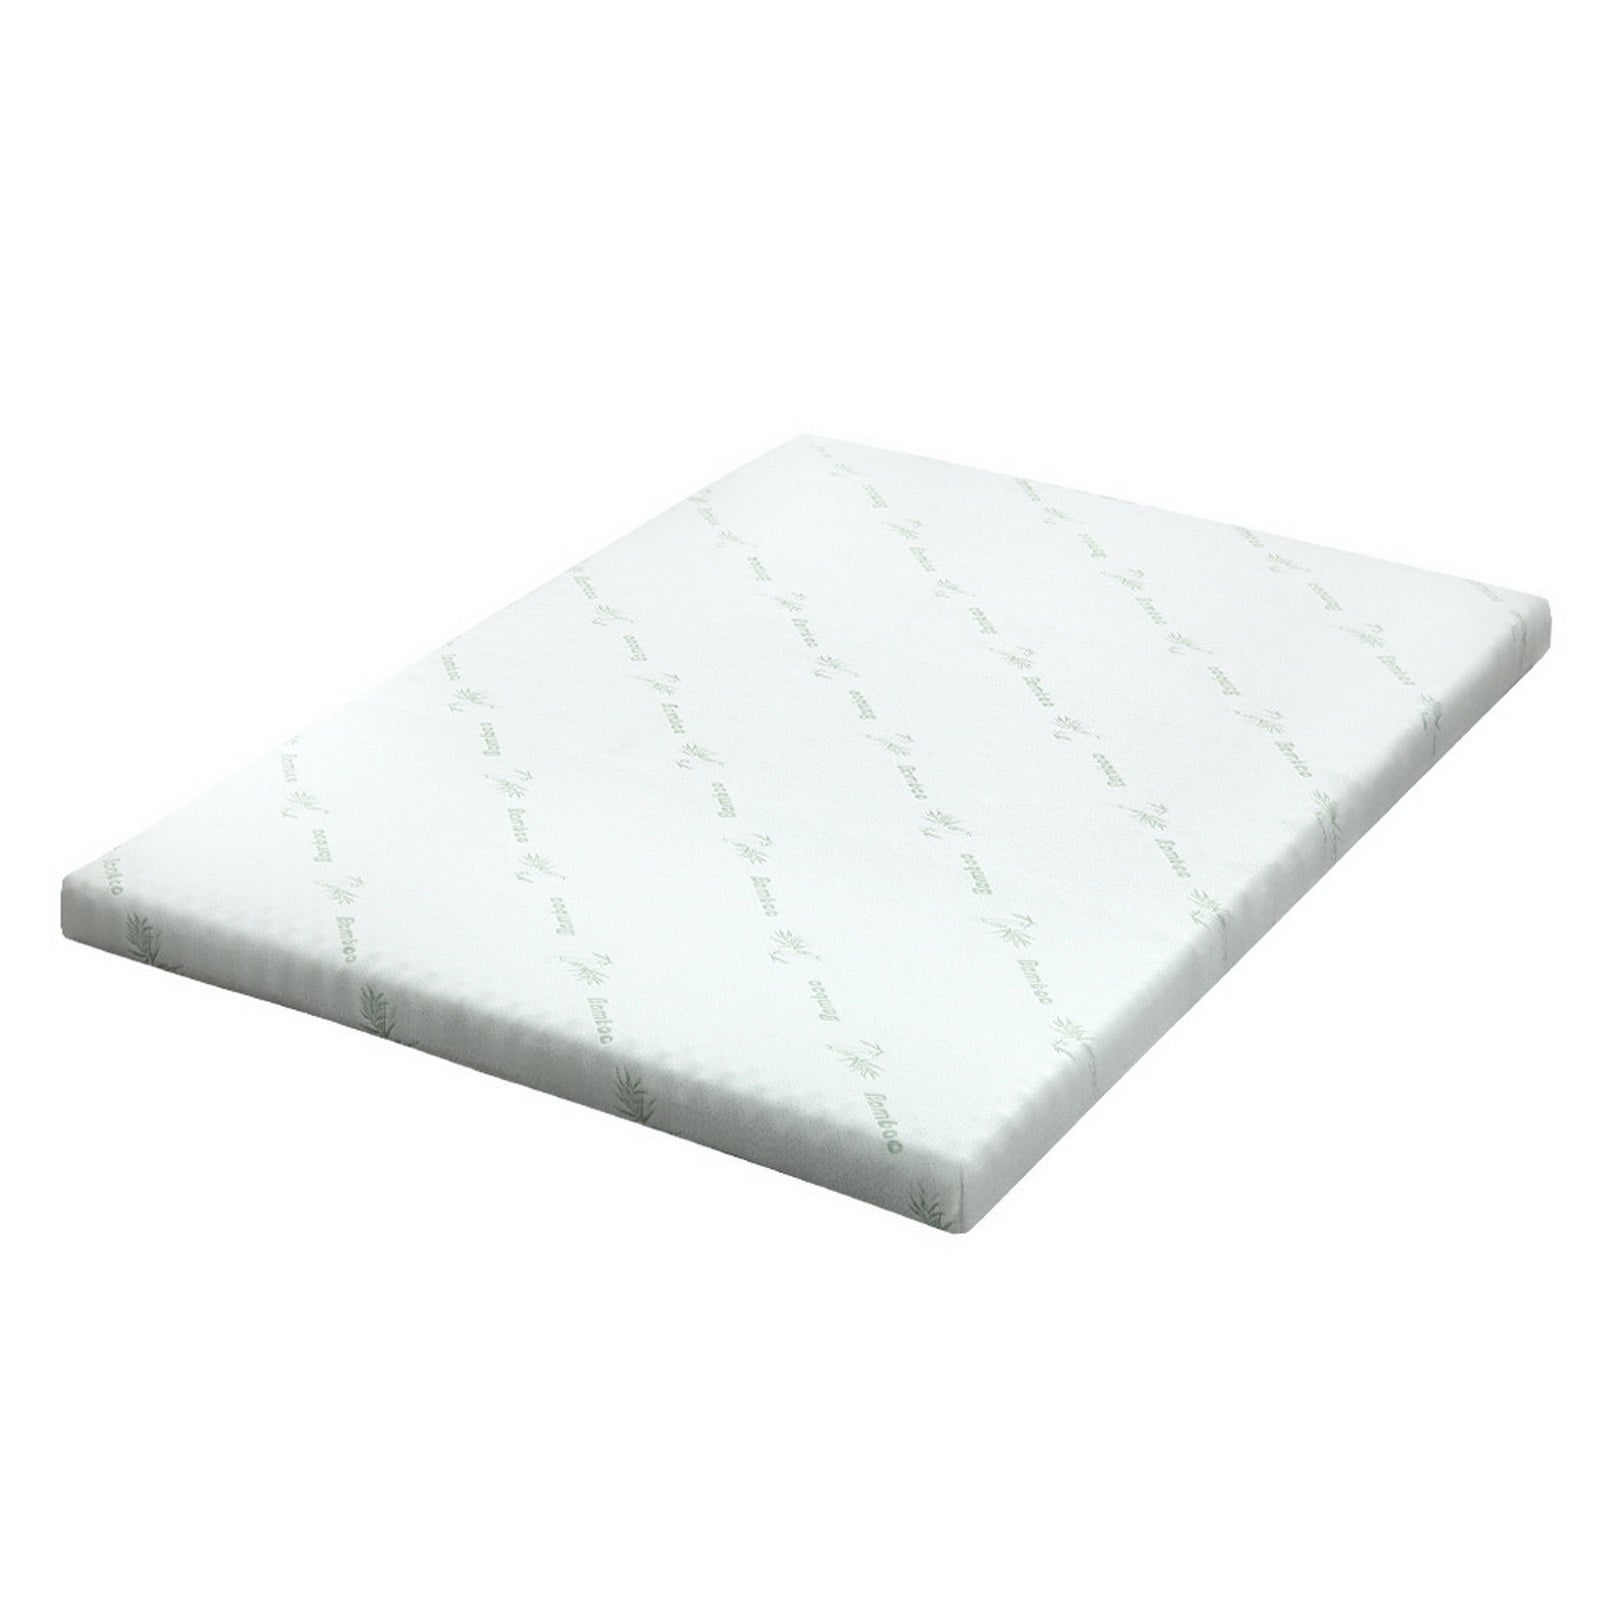 Cool Gel Memory Foam Mattress with Bamboo Cover 8cm - Double